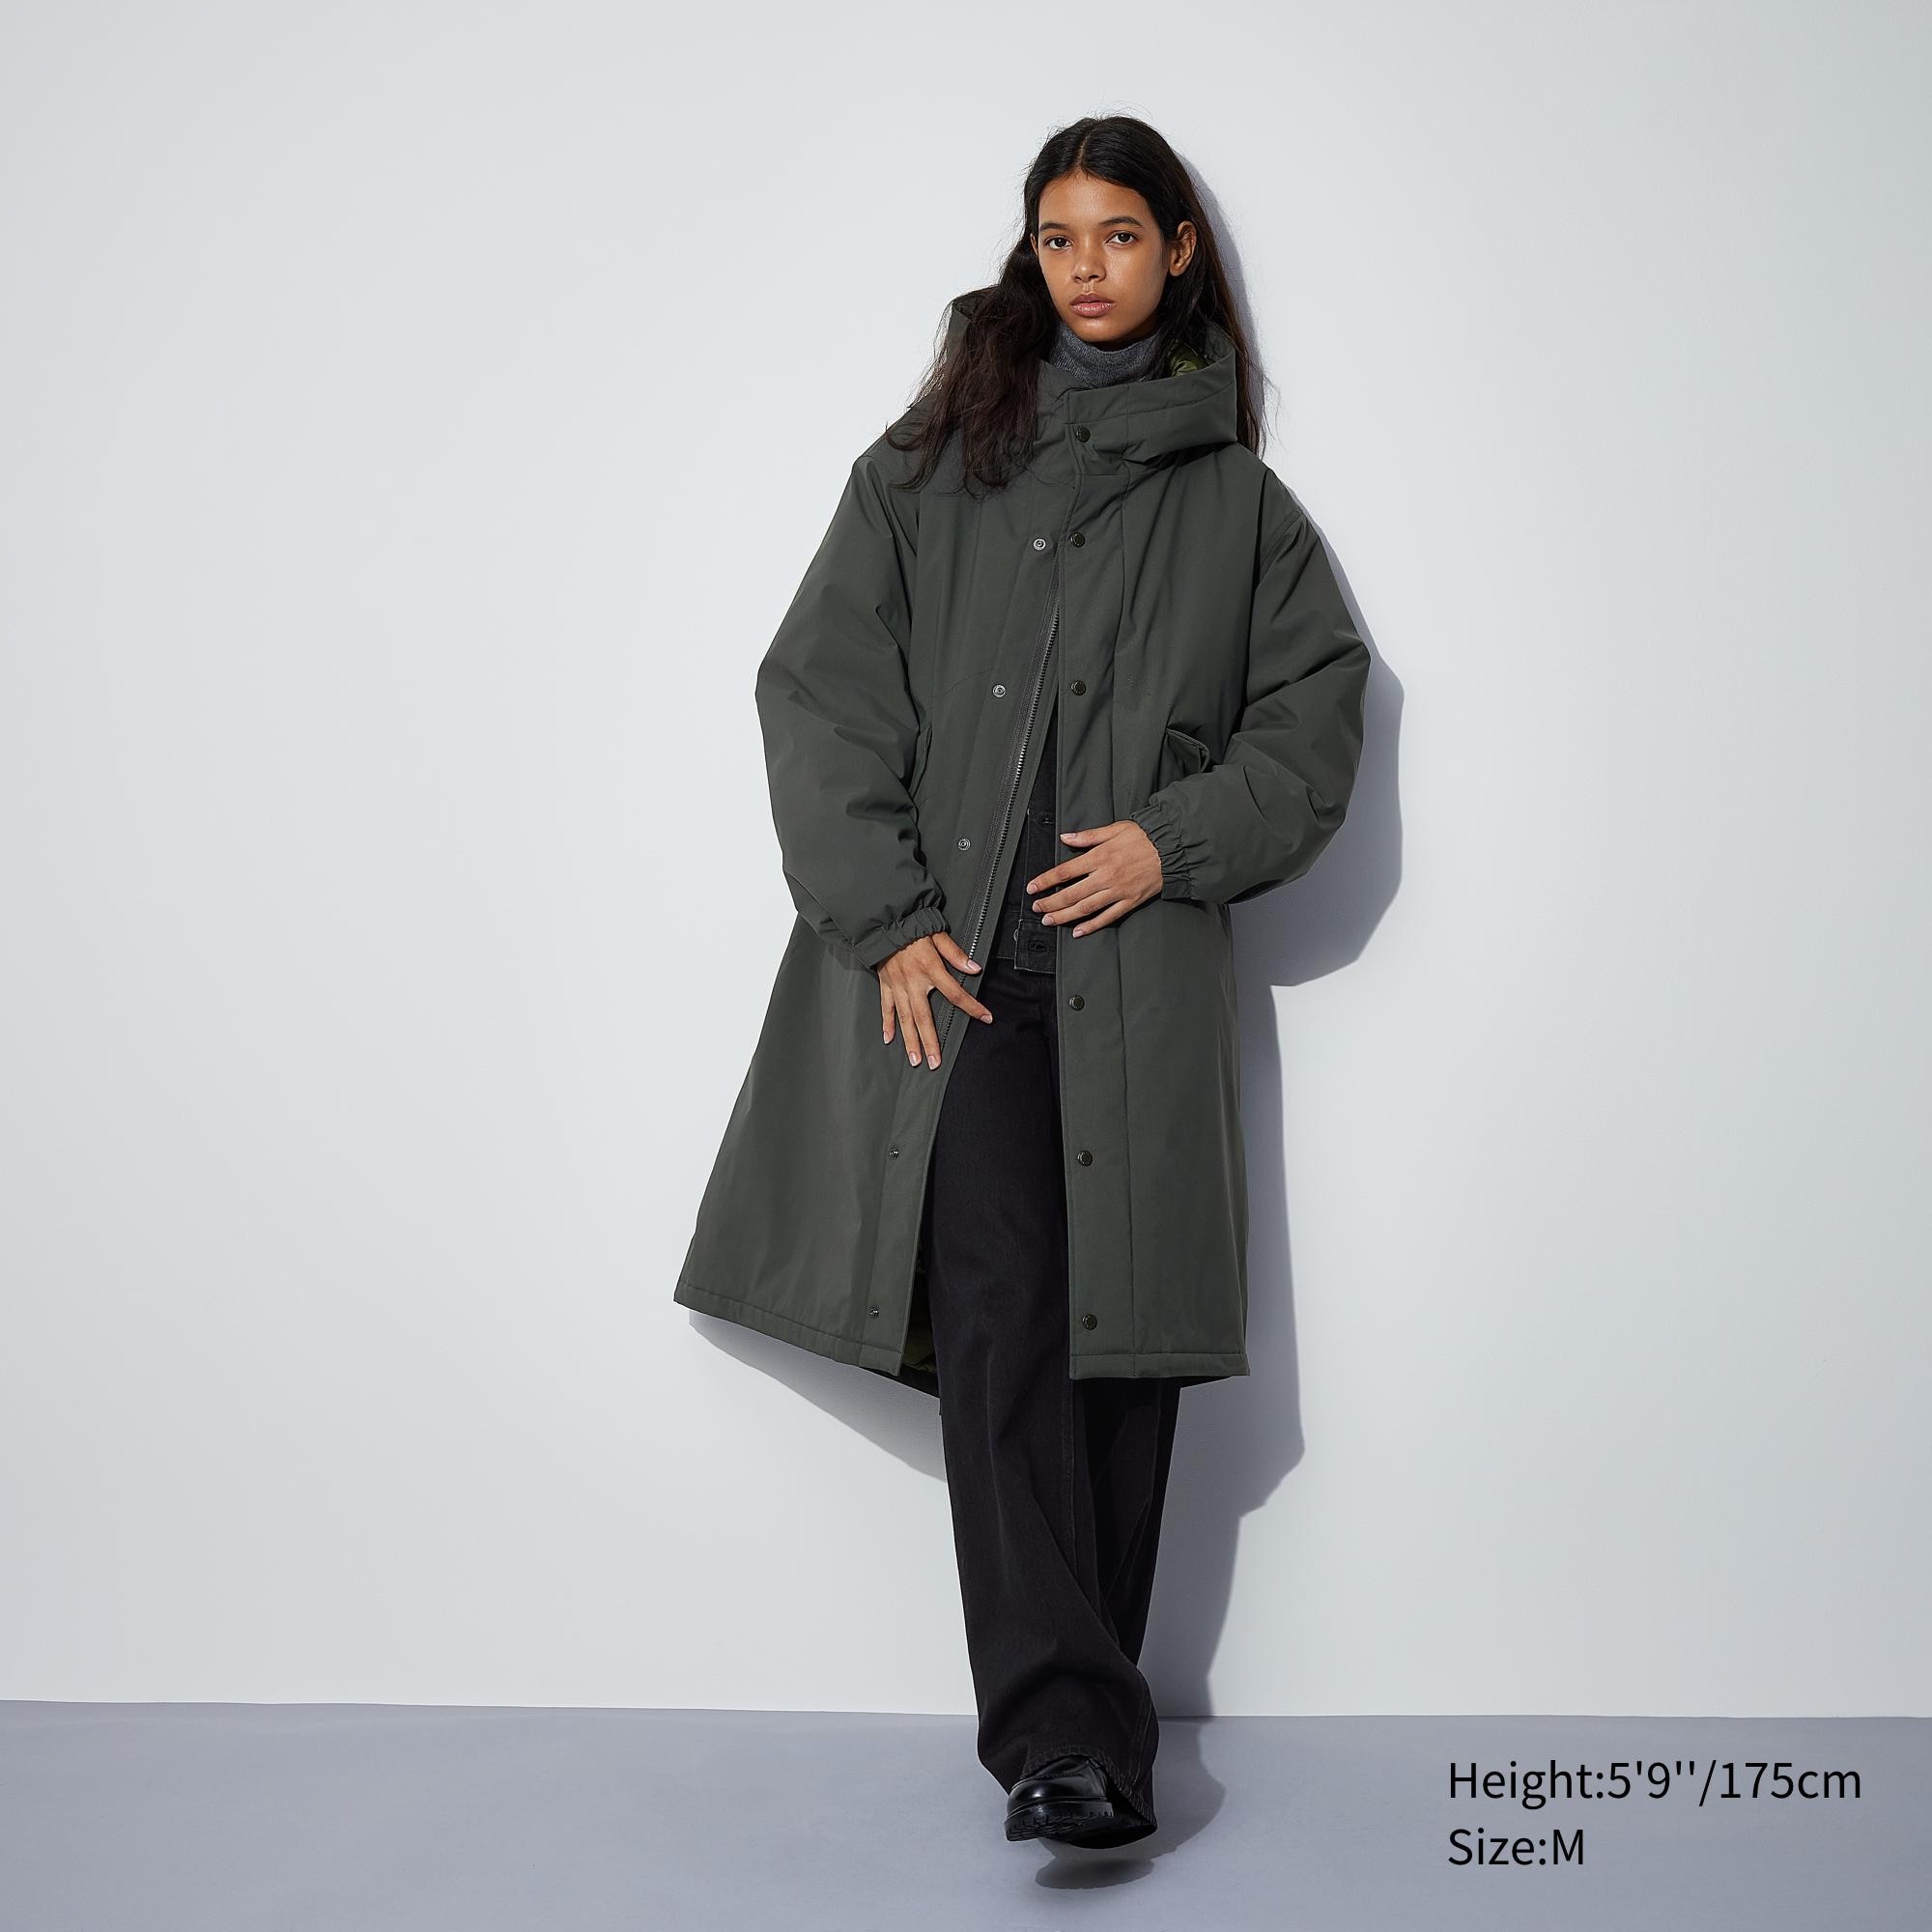 A Seriously Dreamy Fall Coat To Throw On & Go - The Mom Edit